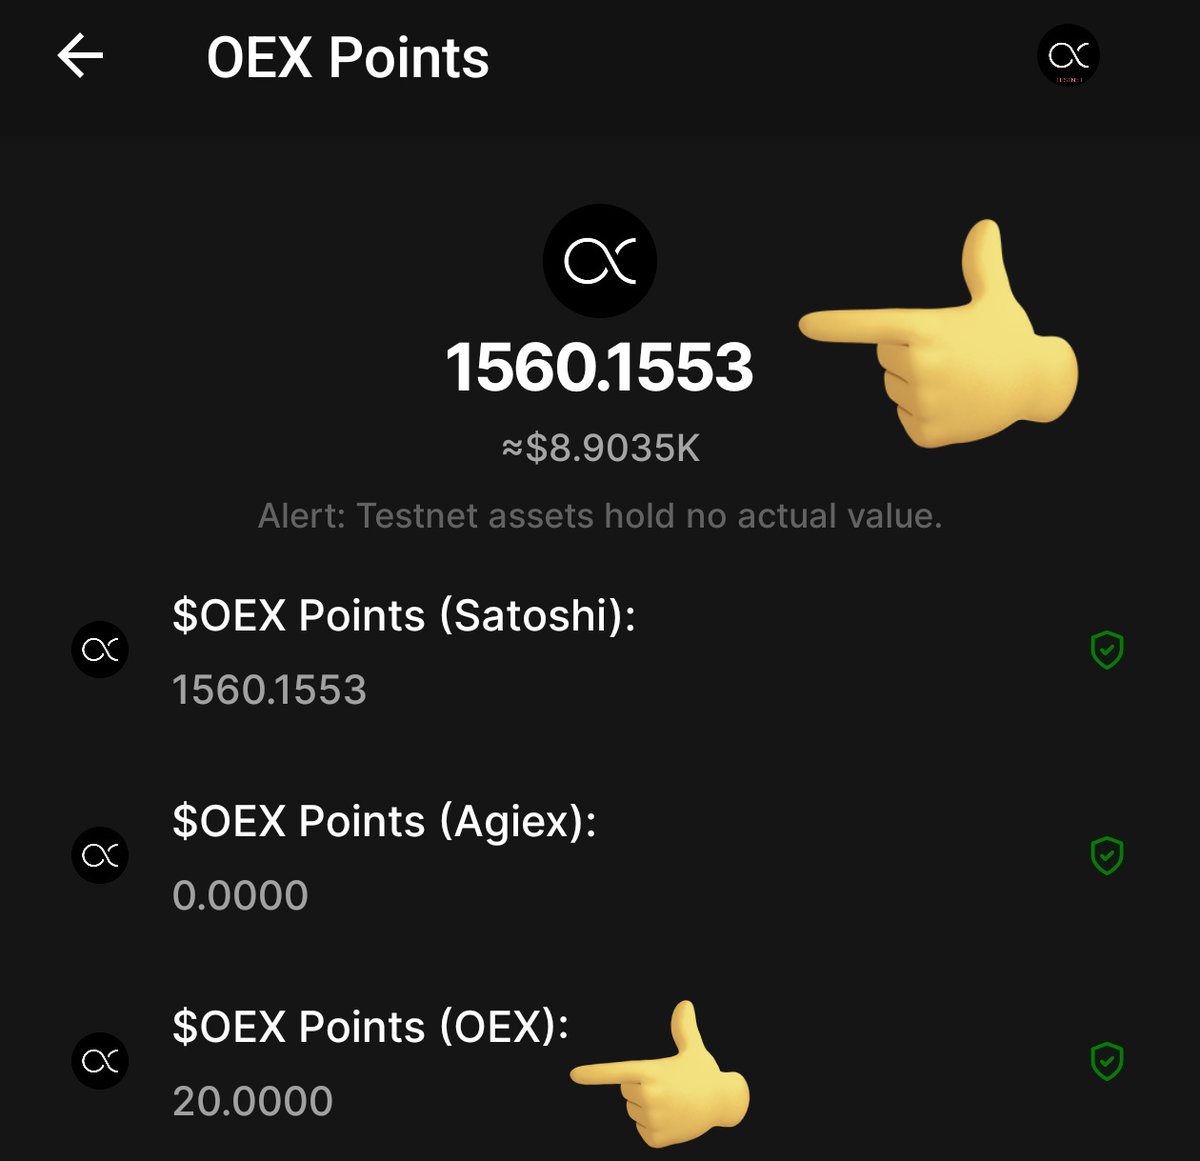 🎉 Congratulations to all members of the $OEX community! 🎉 Today is a great day as we have successfully connected the testnet with the $OEX app and Gmail of Satoshi app with $OEX. Everyone should have received their $OEX points! 🚀 Did you receive yours? Let us know by replying